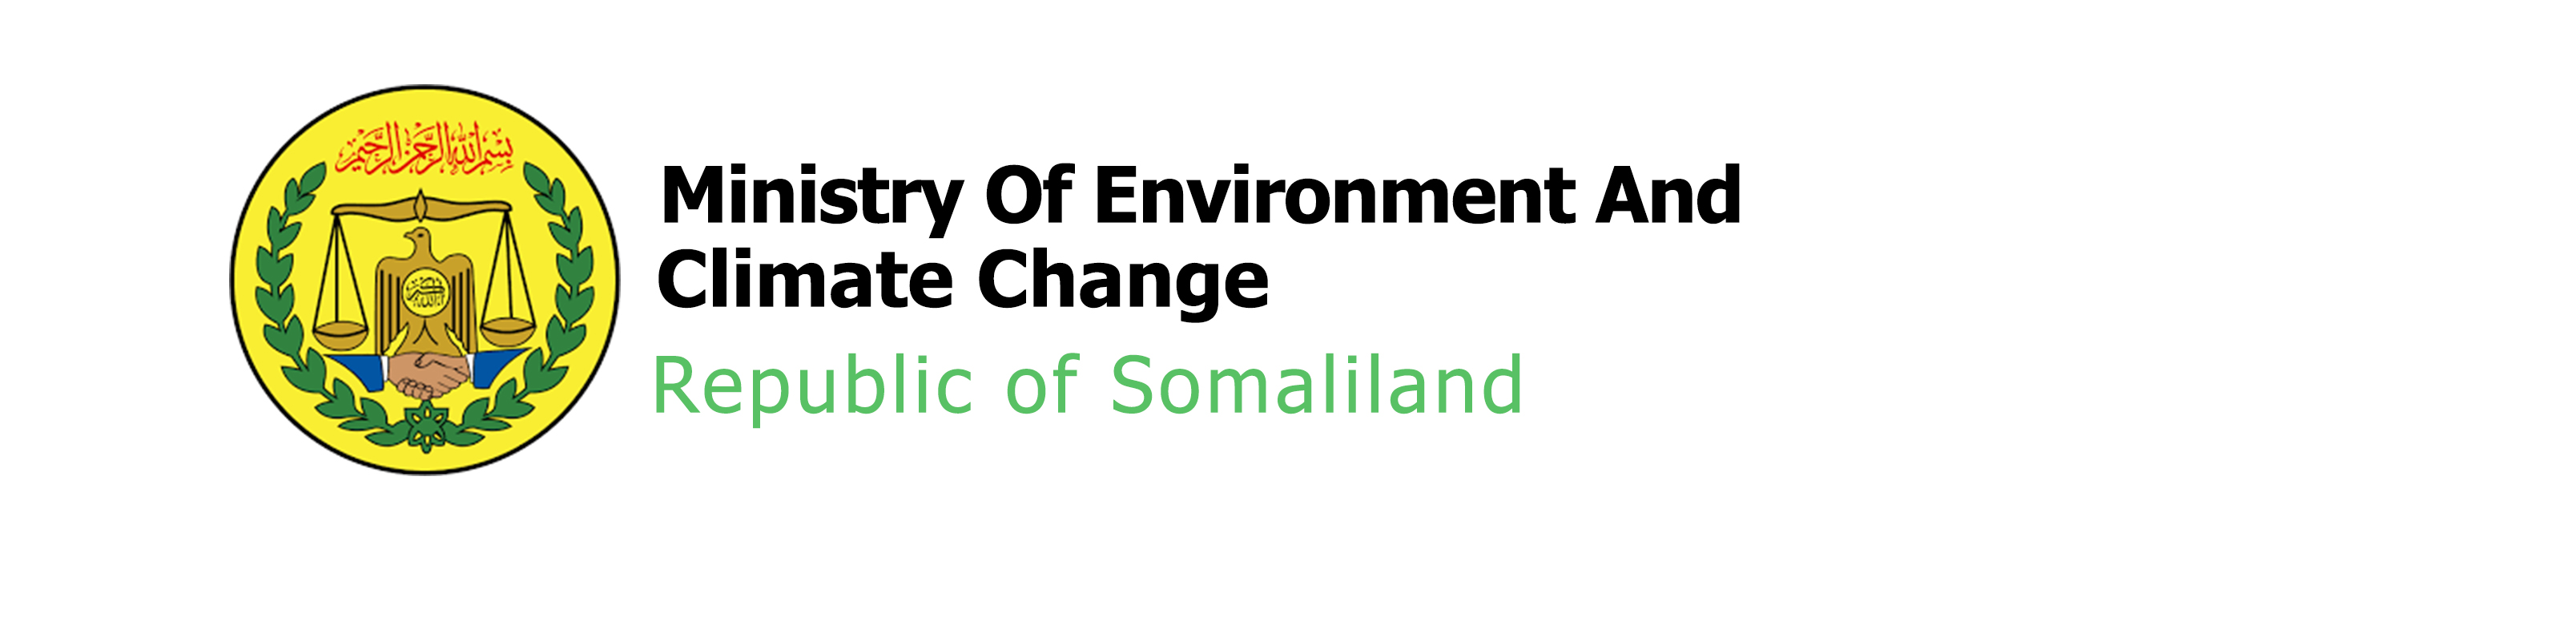 Ministry of Environment and Climate Change